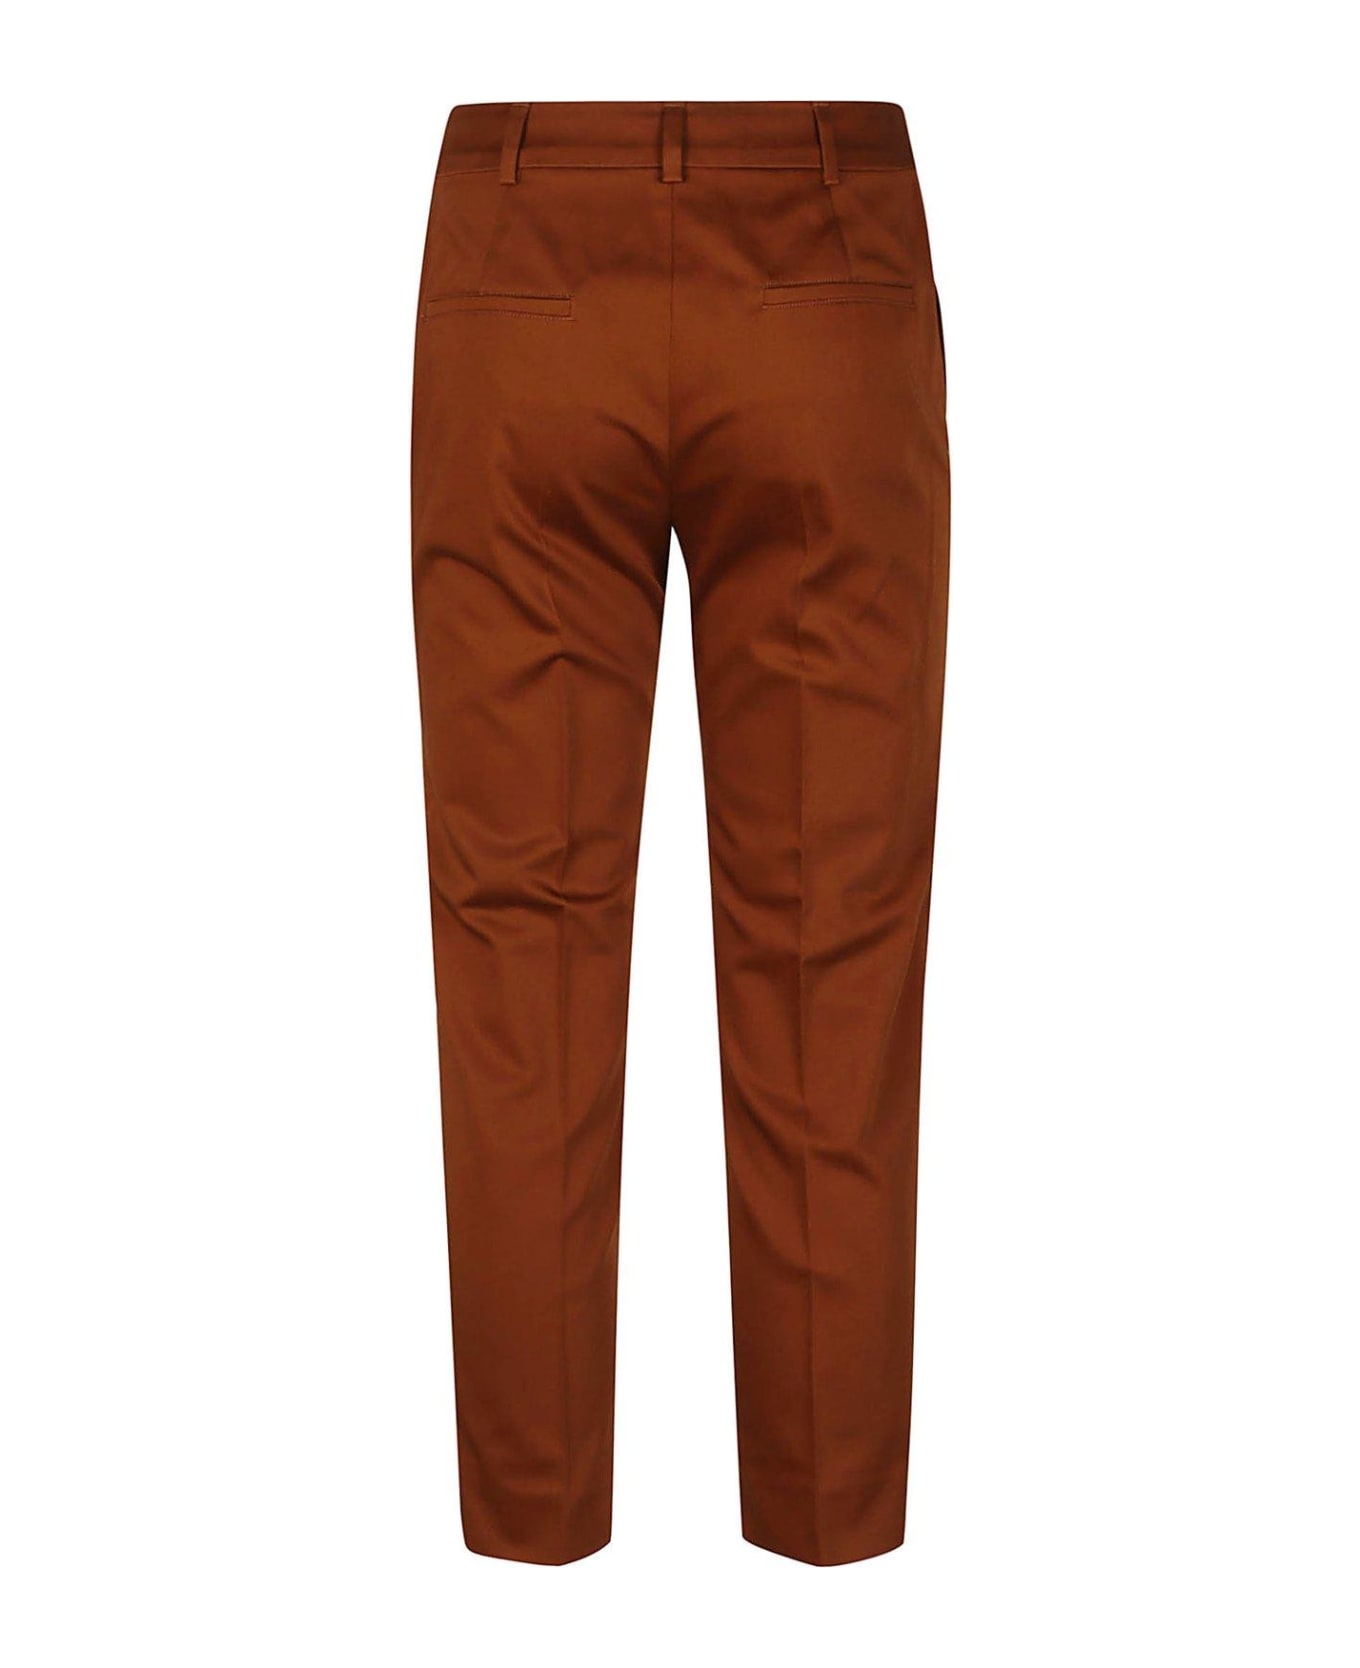 Max Mara Tapered Cropped Trousers - Cuoio Scuro ボトムス